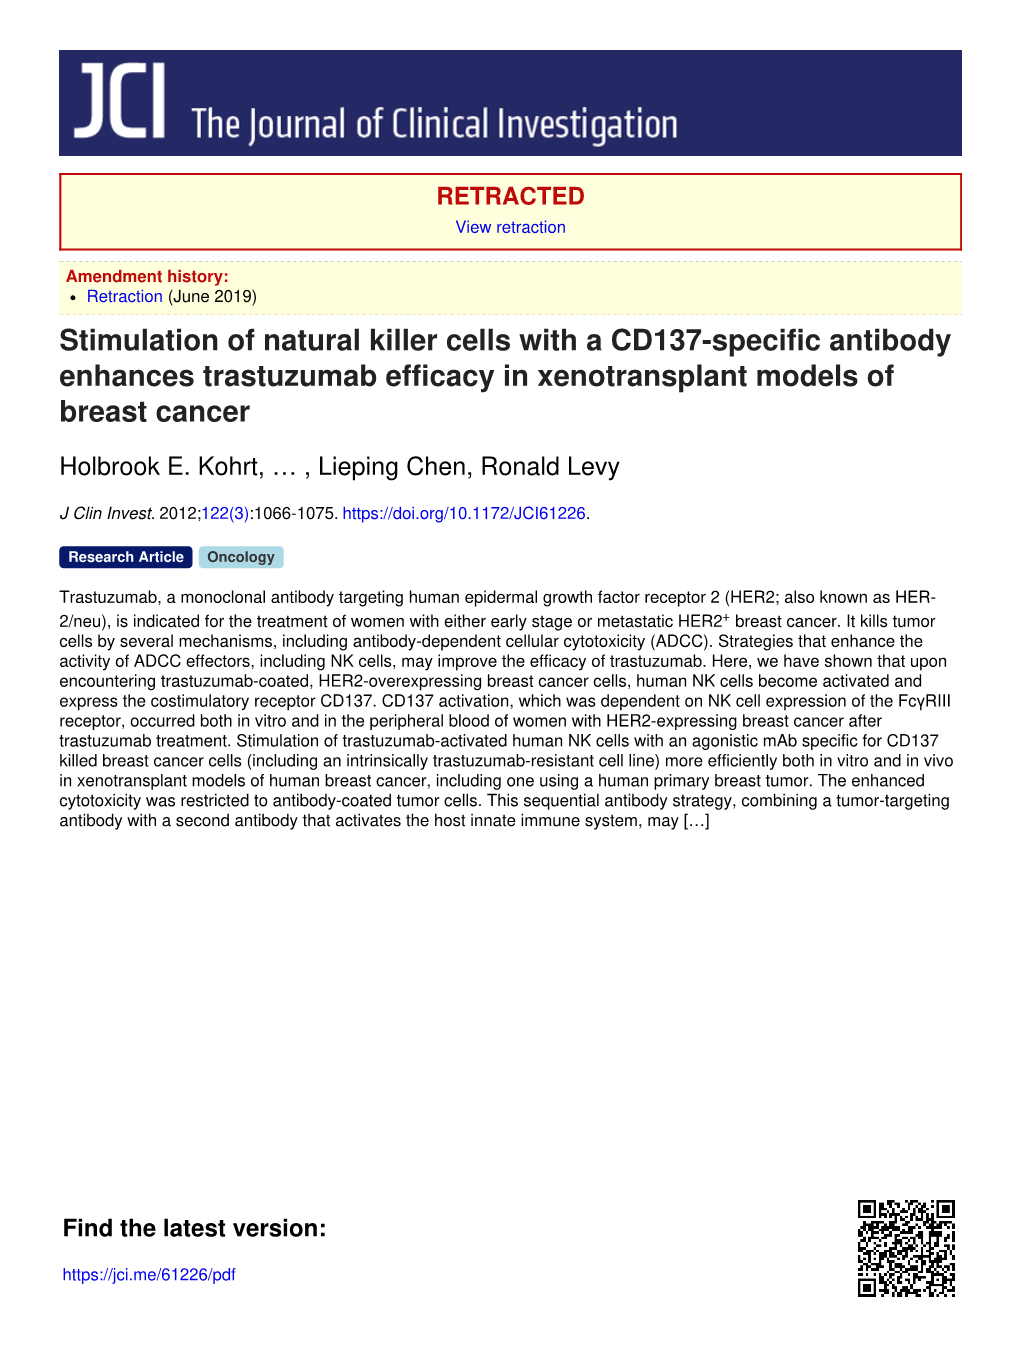 Stimulation of Natural Killer Cells with a CD137-Specific Antibody Enhances Trastuzumab Efficacy in Xenotransplant Models of Breast Cancer